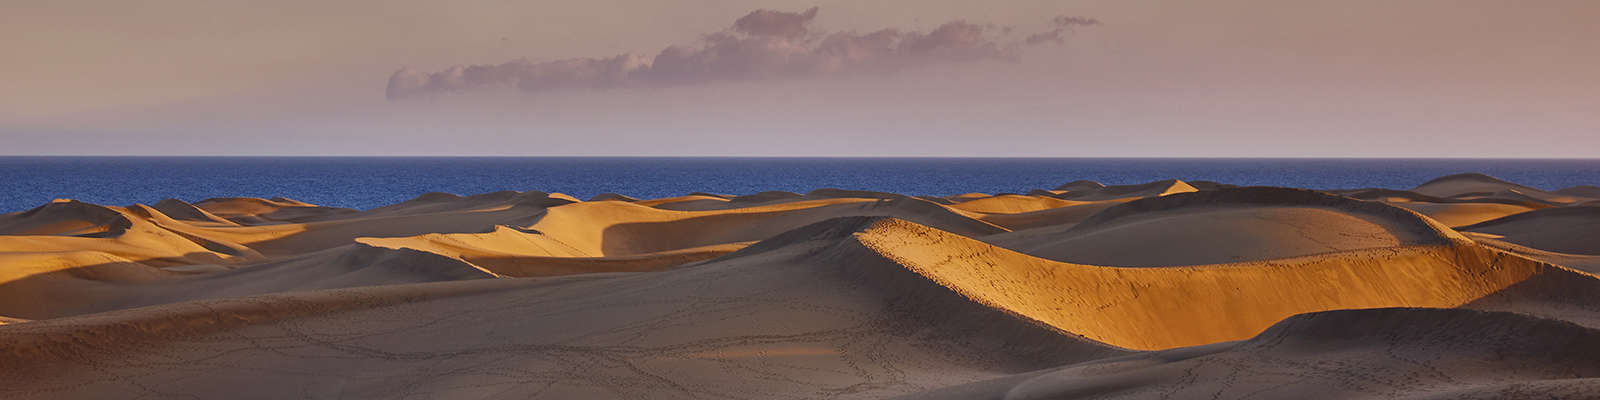 Impressive deserts and oasis in the Canary Islands